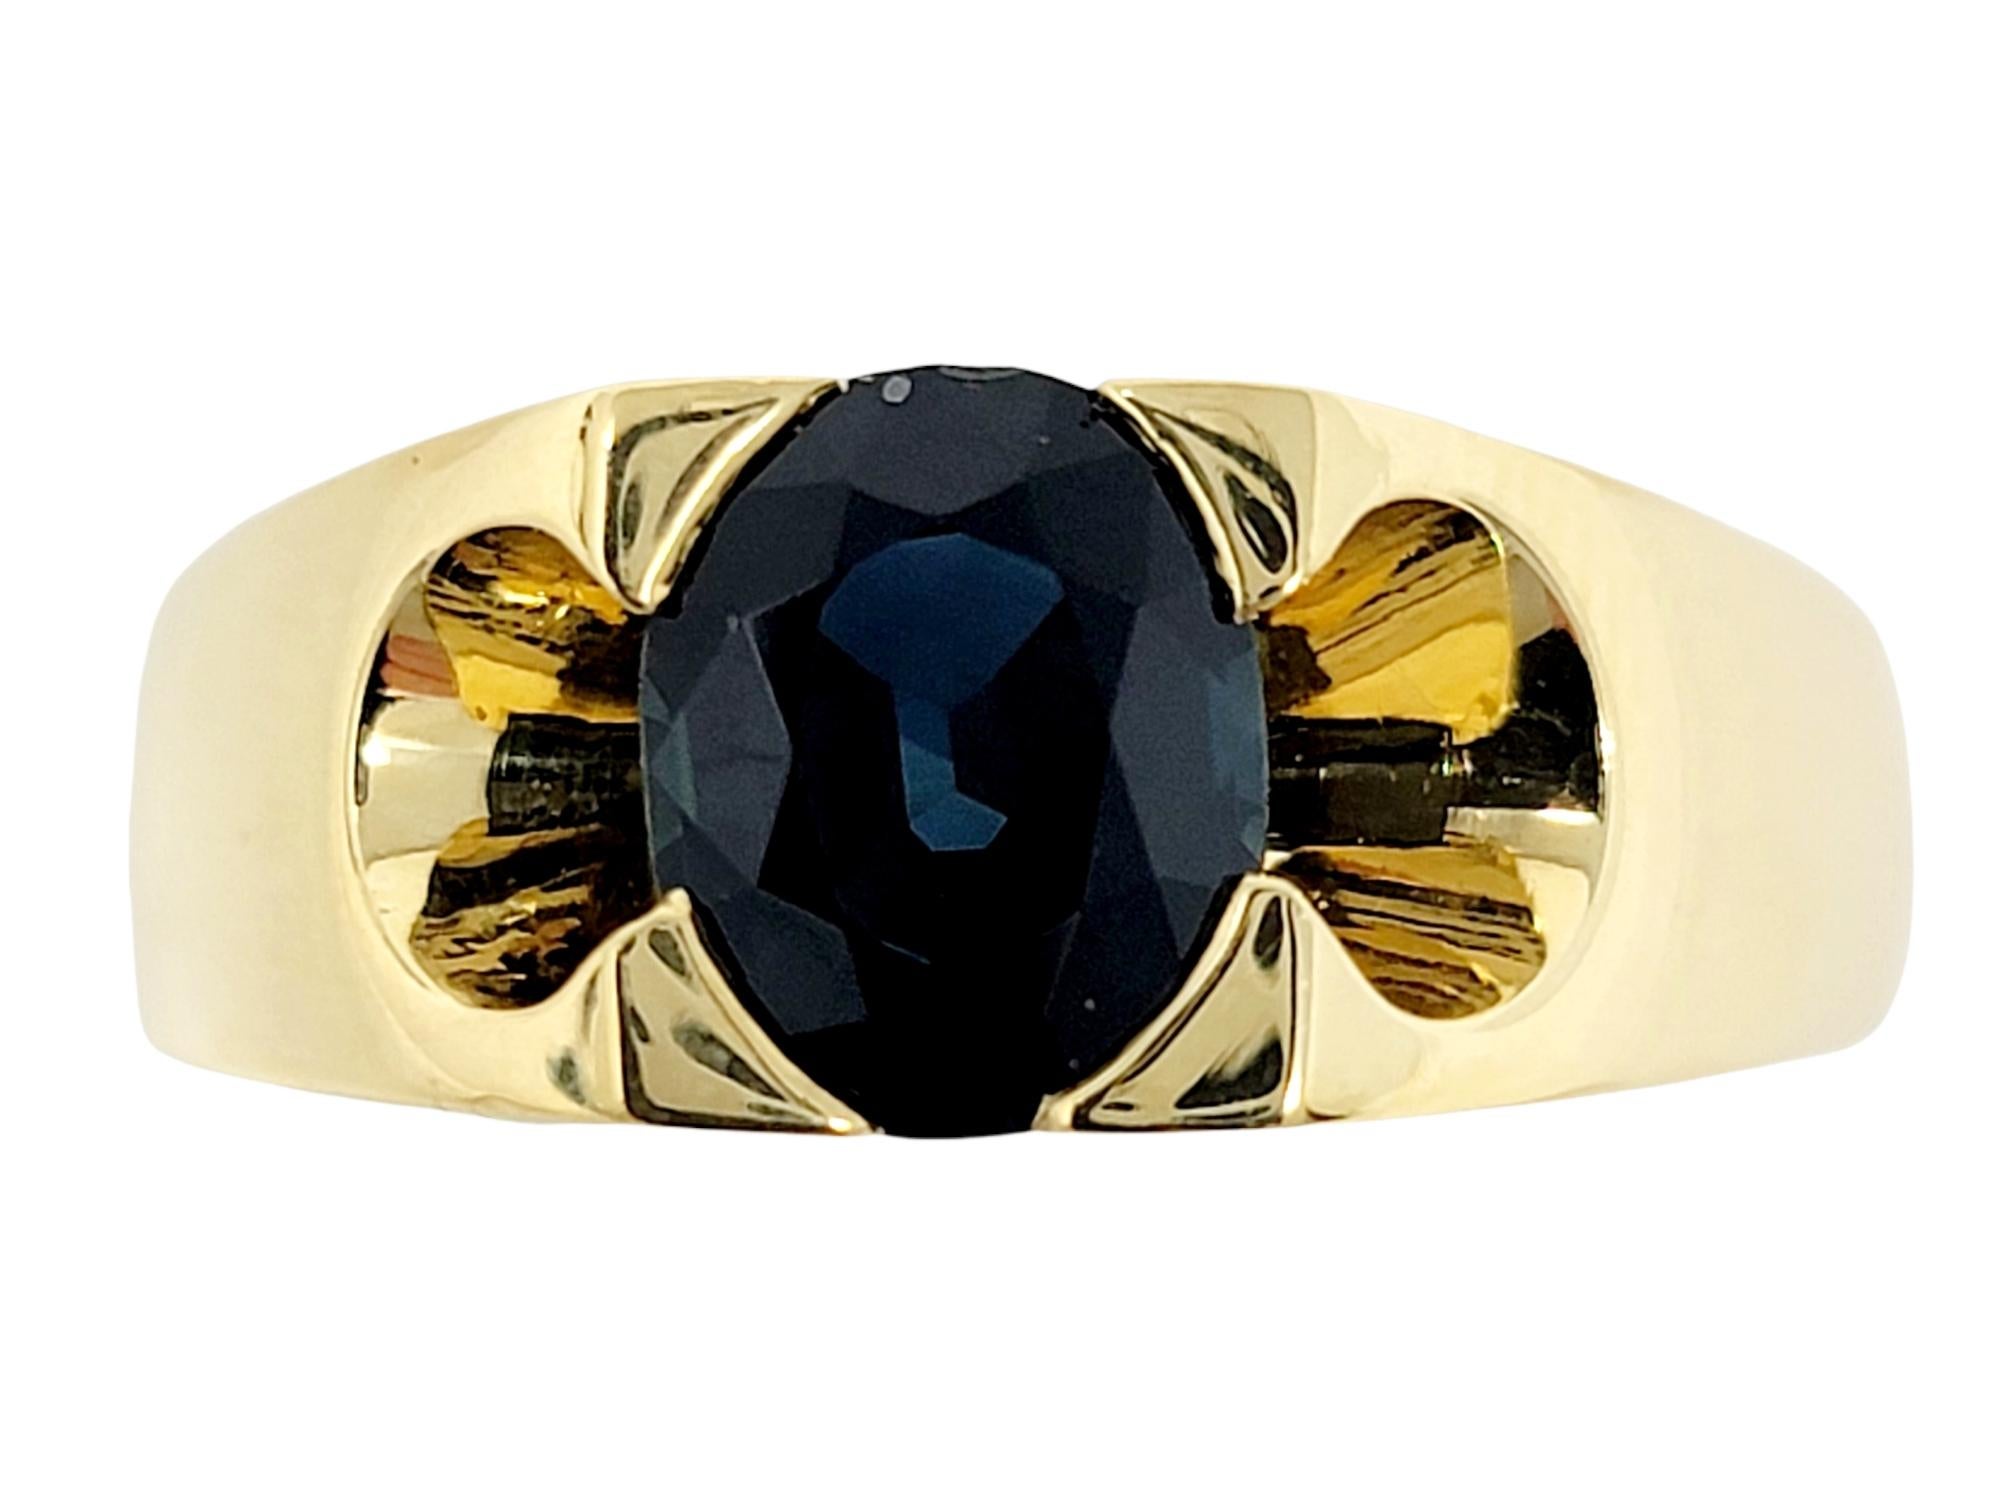 Ring size: 11

Handsome men's band ring with a gorgeous dark blue solitaire sapphire stone. The sleek, polished gold pairs beautifully with the deep blue stone, and has a nice weight on the finger. 

Ring Style: Solitaire
Metal: 18 Yellow Gold
Ring